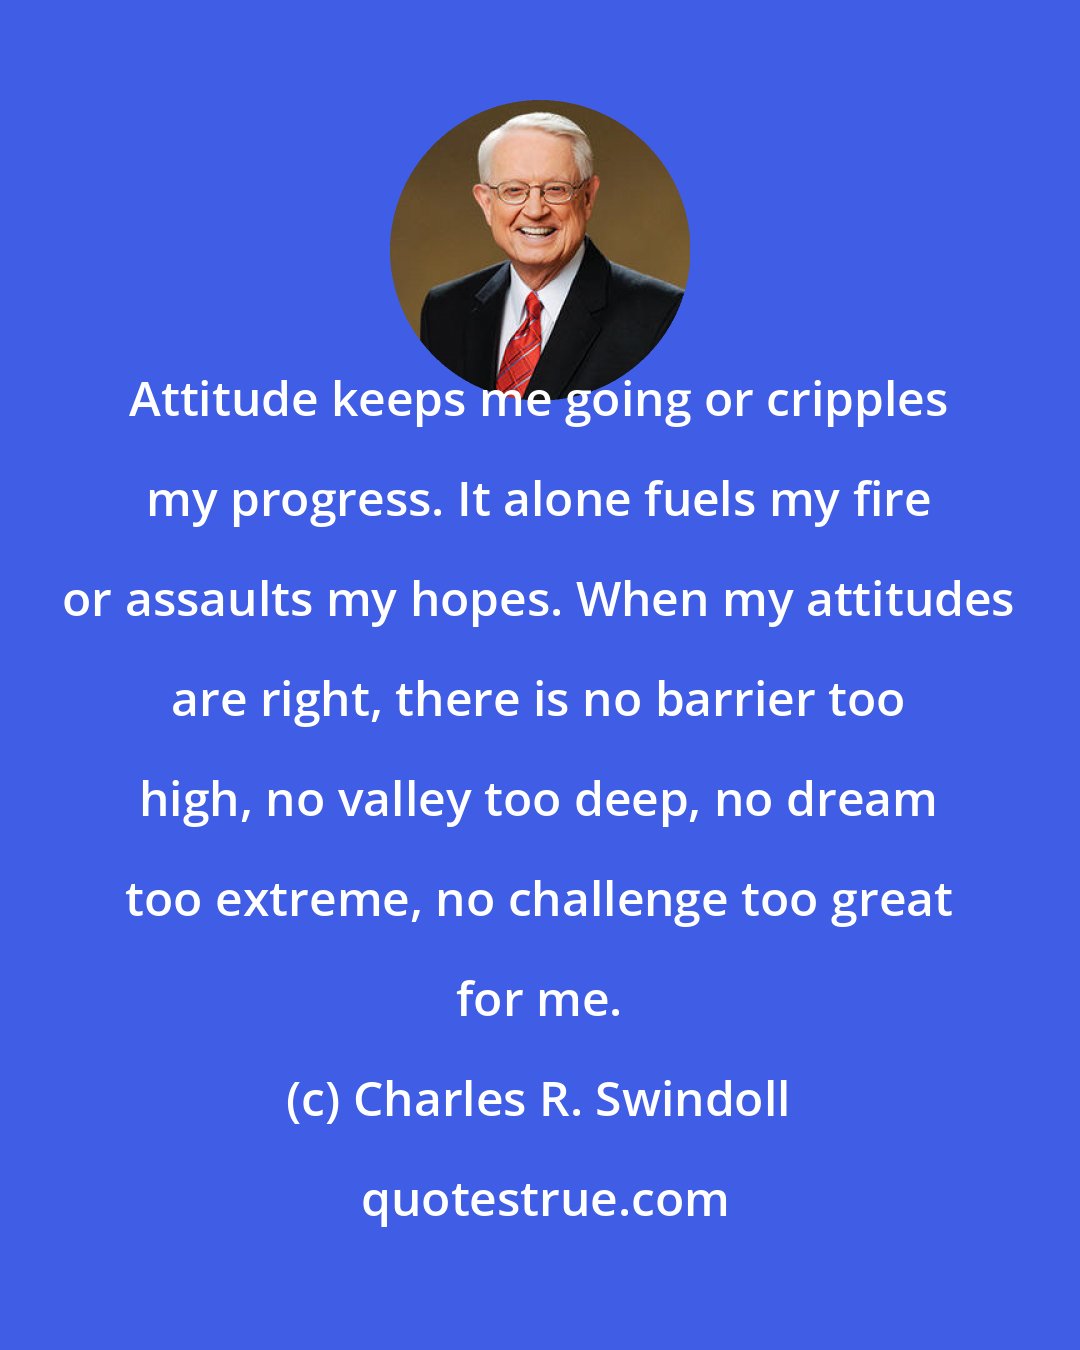 Charles R. Swindoll: Attitude keeps me going or cripples my progress. It alone fuels my fire or assaults my hopes. When my attitudes are right, there is no barrier too high, no valley too deep, no dream too extreme, no challenge too great for me.